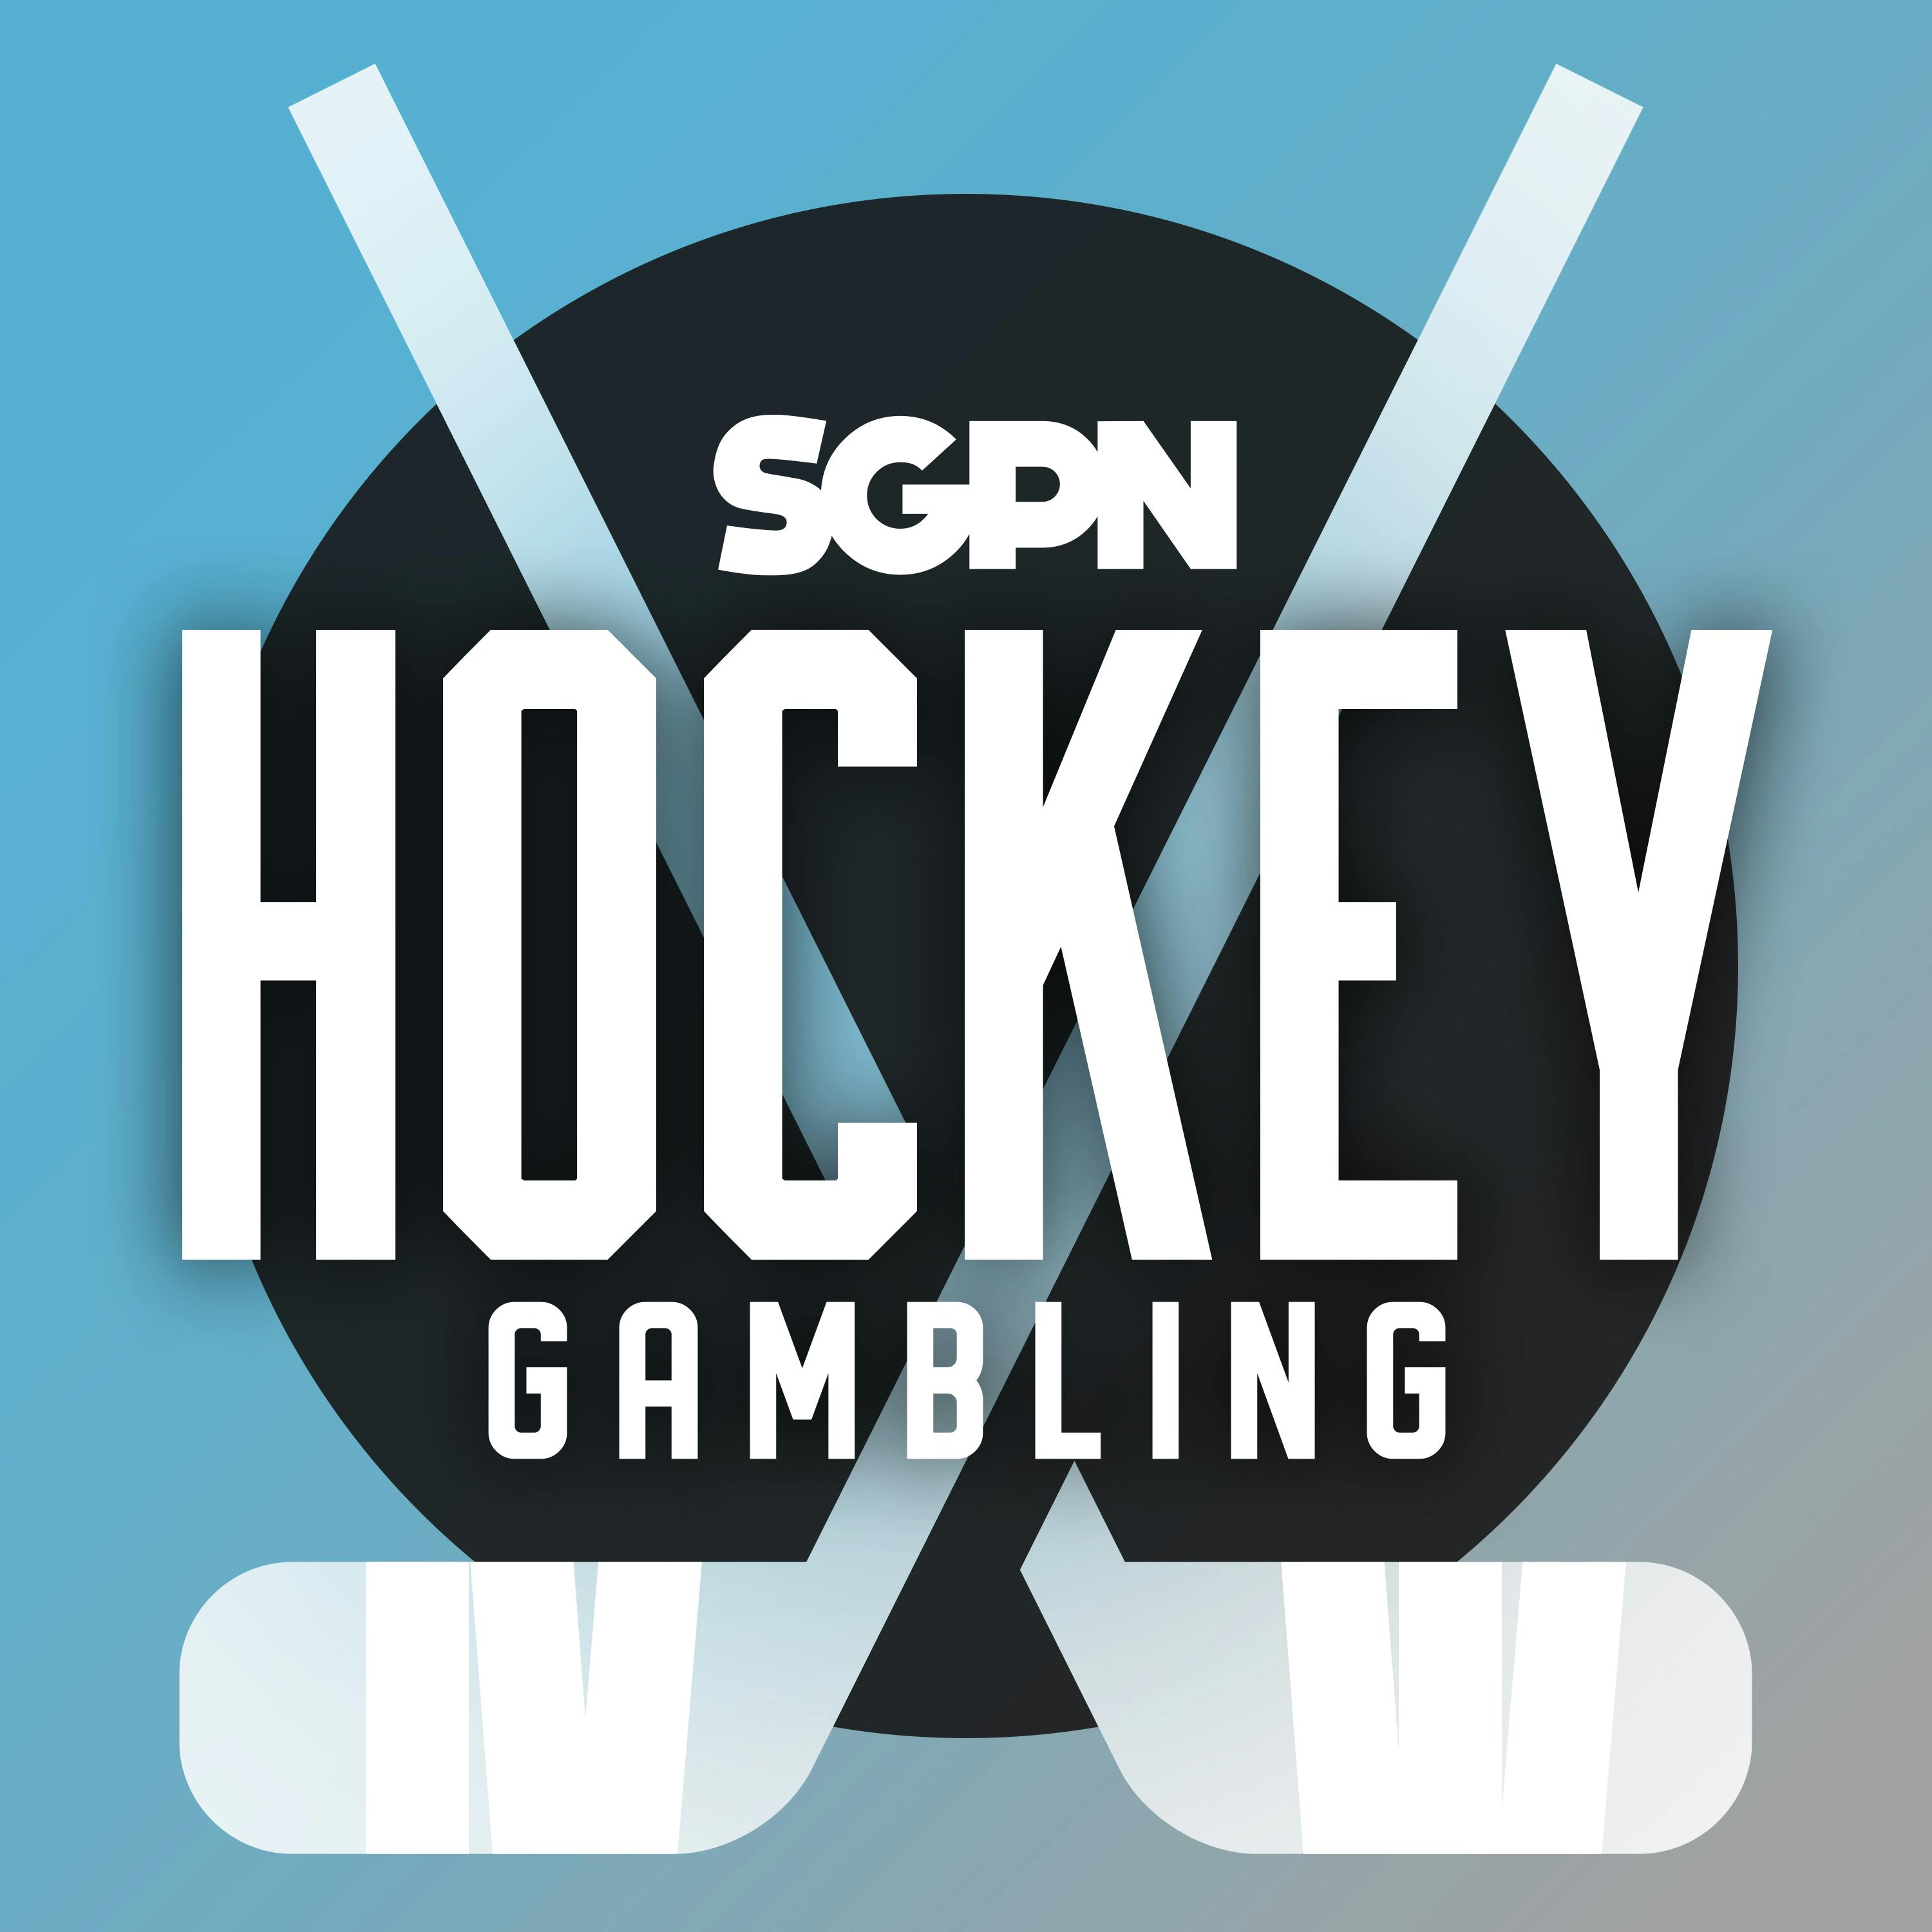 NHL Playoffs Betting Picks & Player Props - Tuesday, April 23 (Ep. 349)